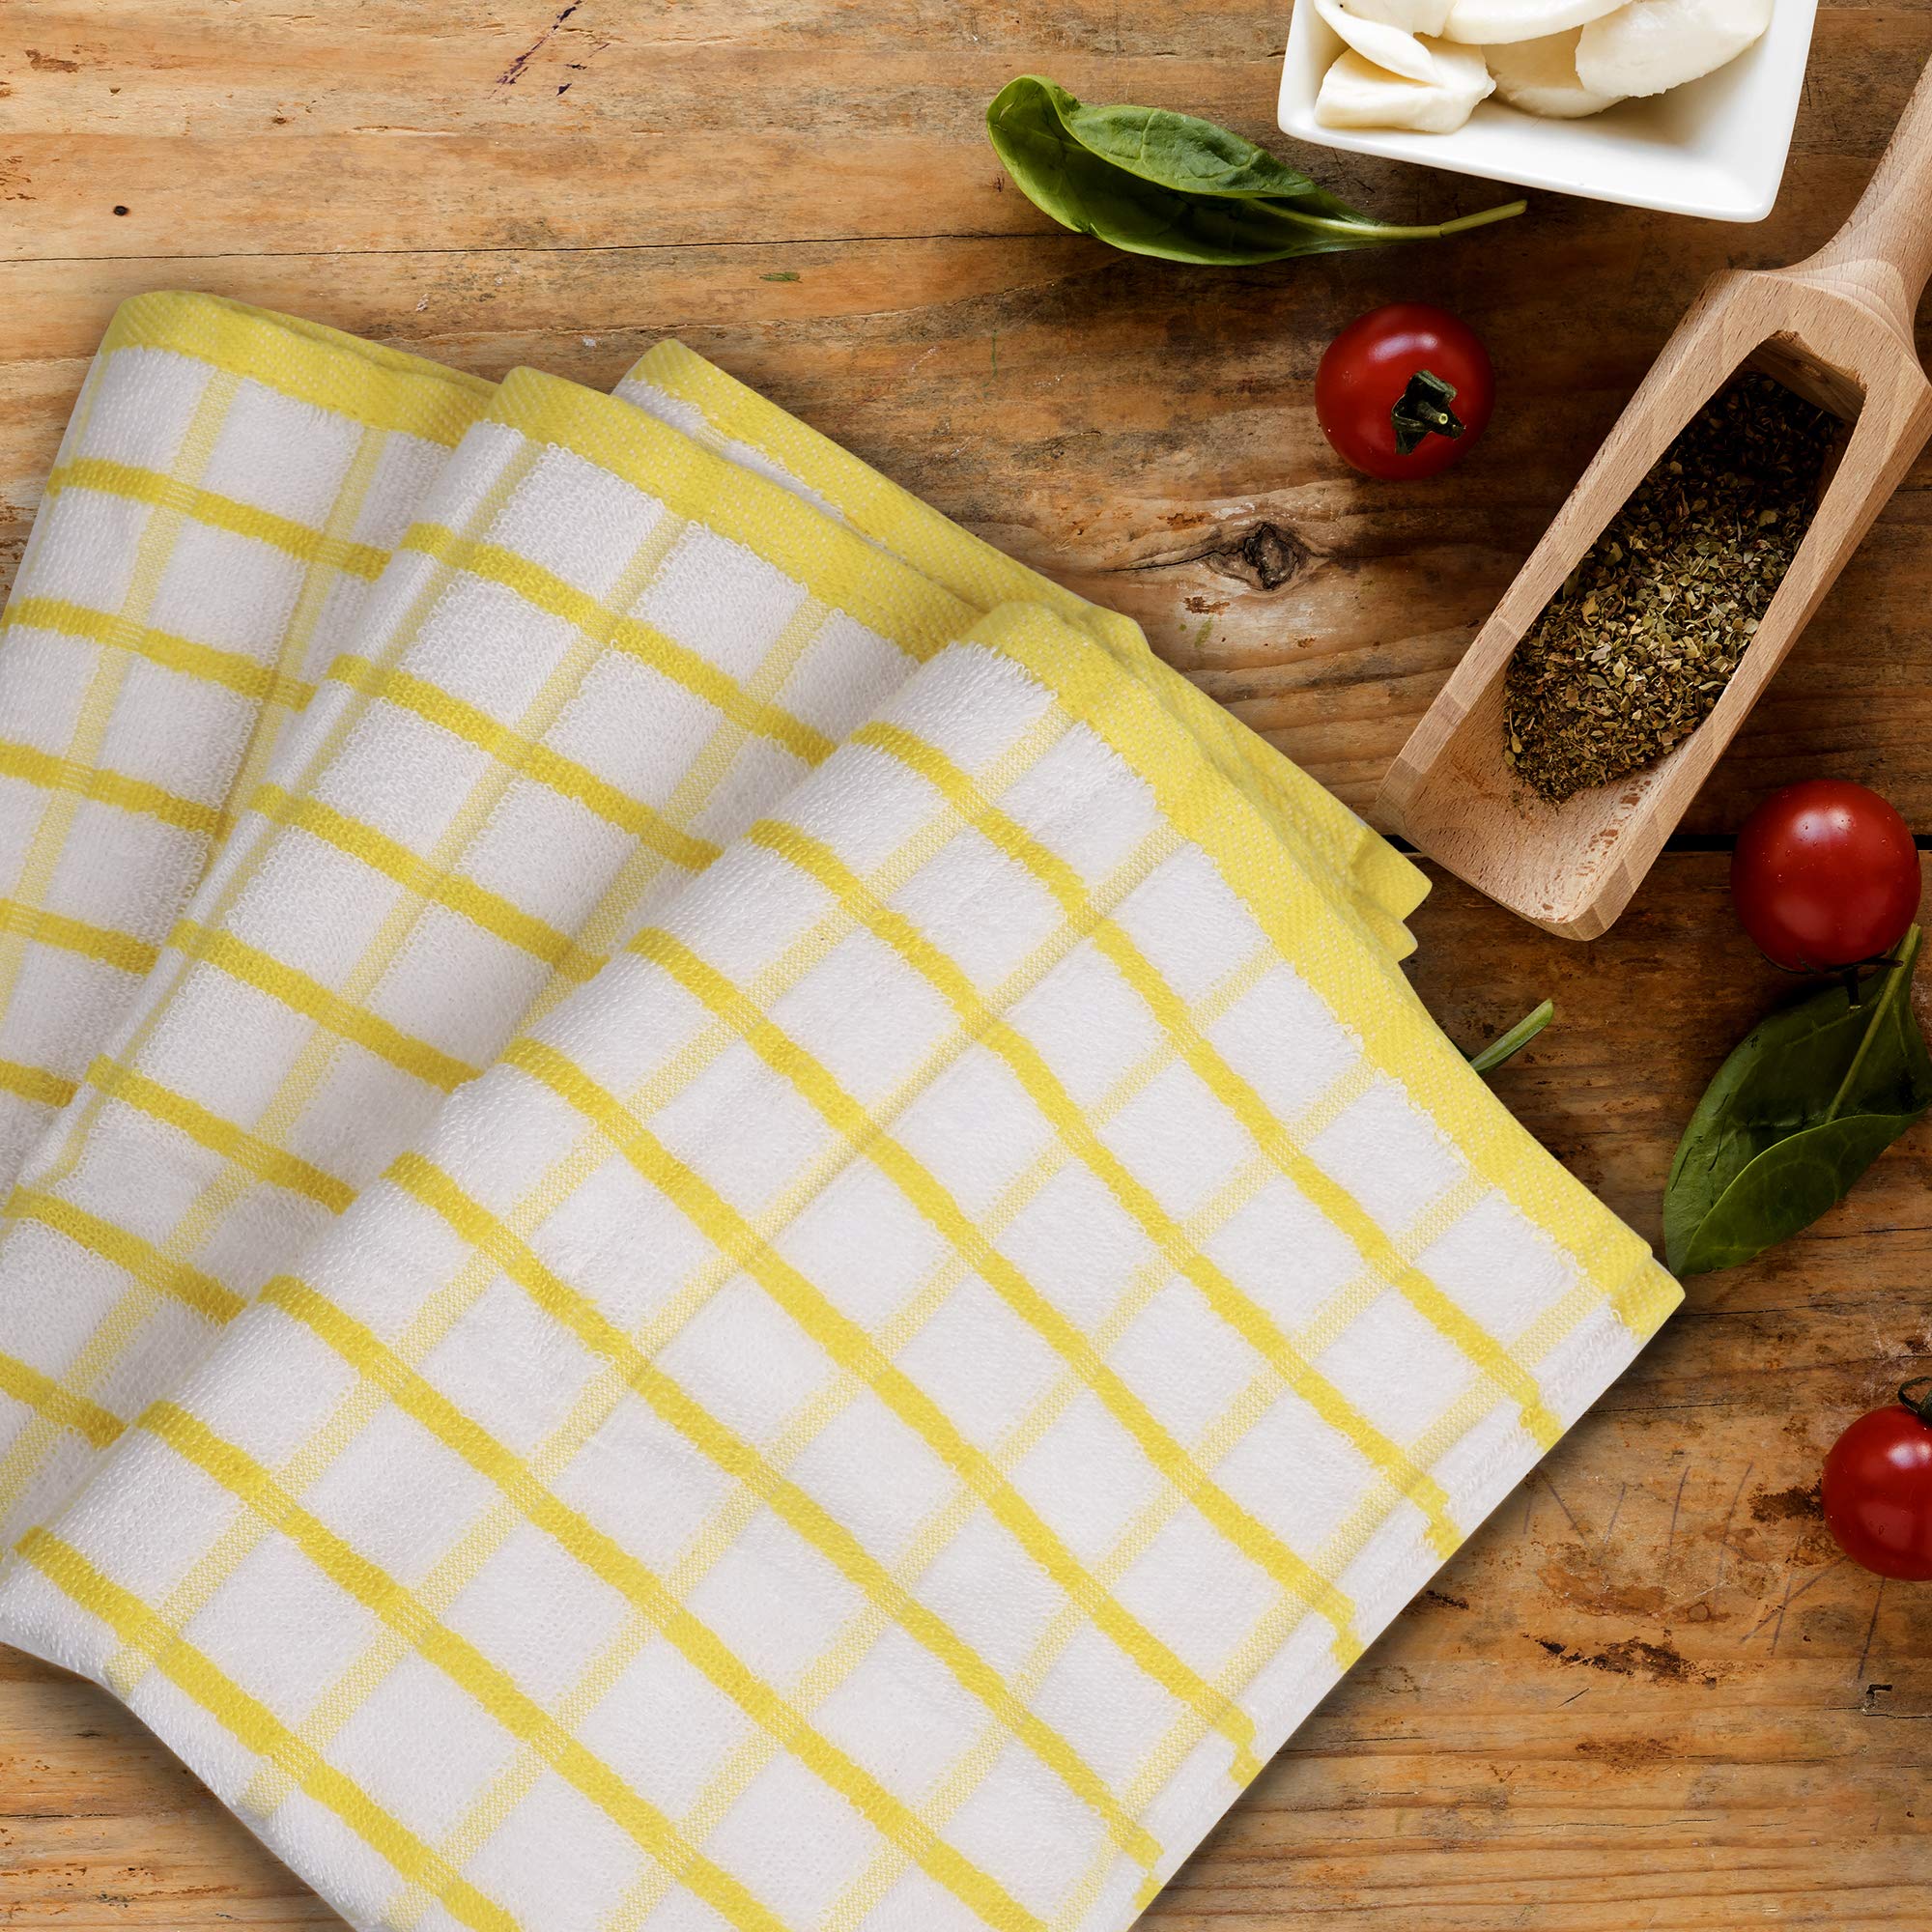 Urban Villa Kitchen Towels Yellow/White Set of 3 Terry Kitchen Towels 100% Cotton Ultra Soft Size 20X30 Inches Highly Absorbent Over Sized Kitchen Towels with Hanging Loop Kitchen Towels